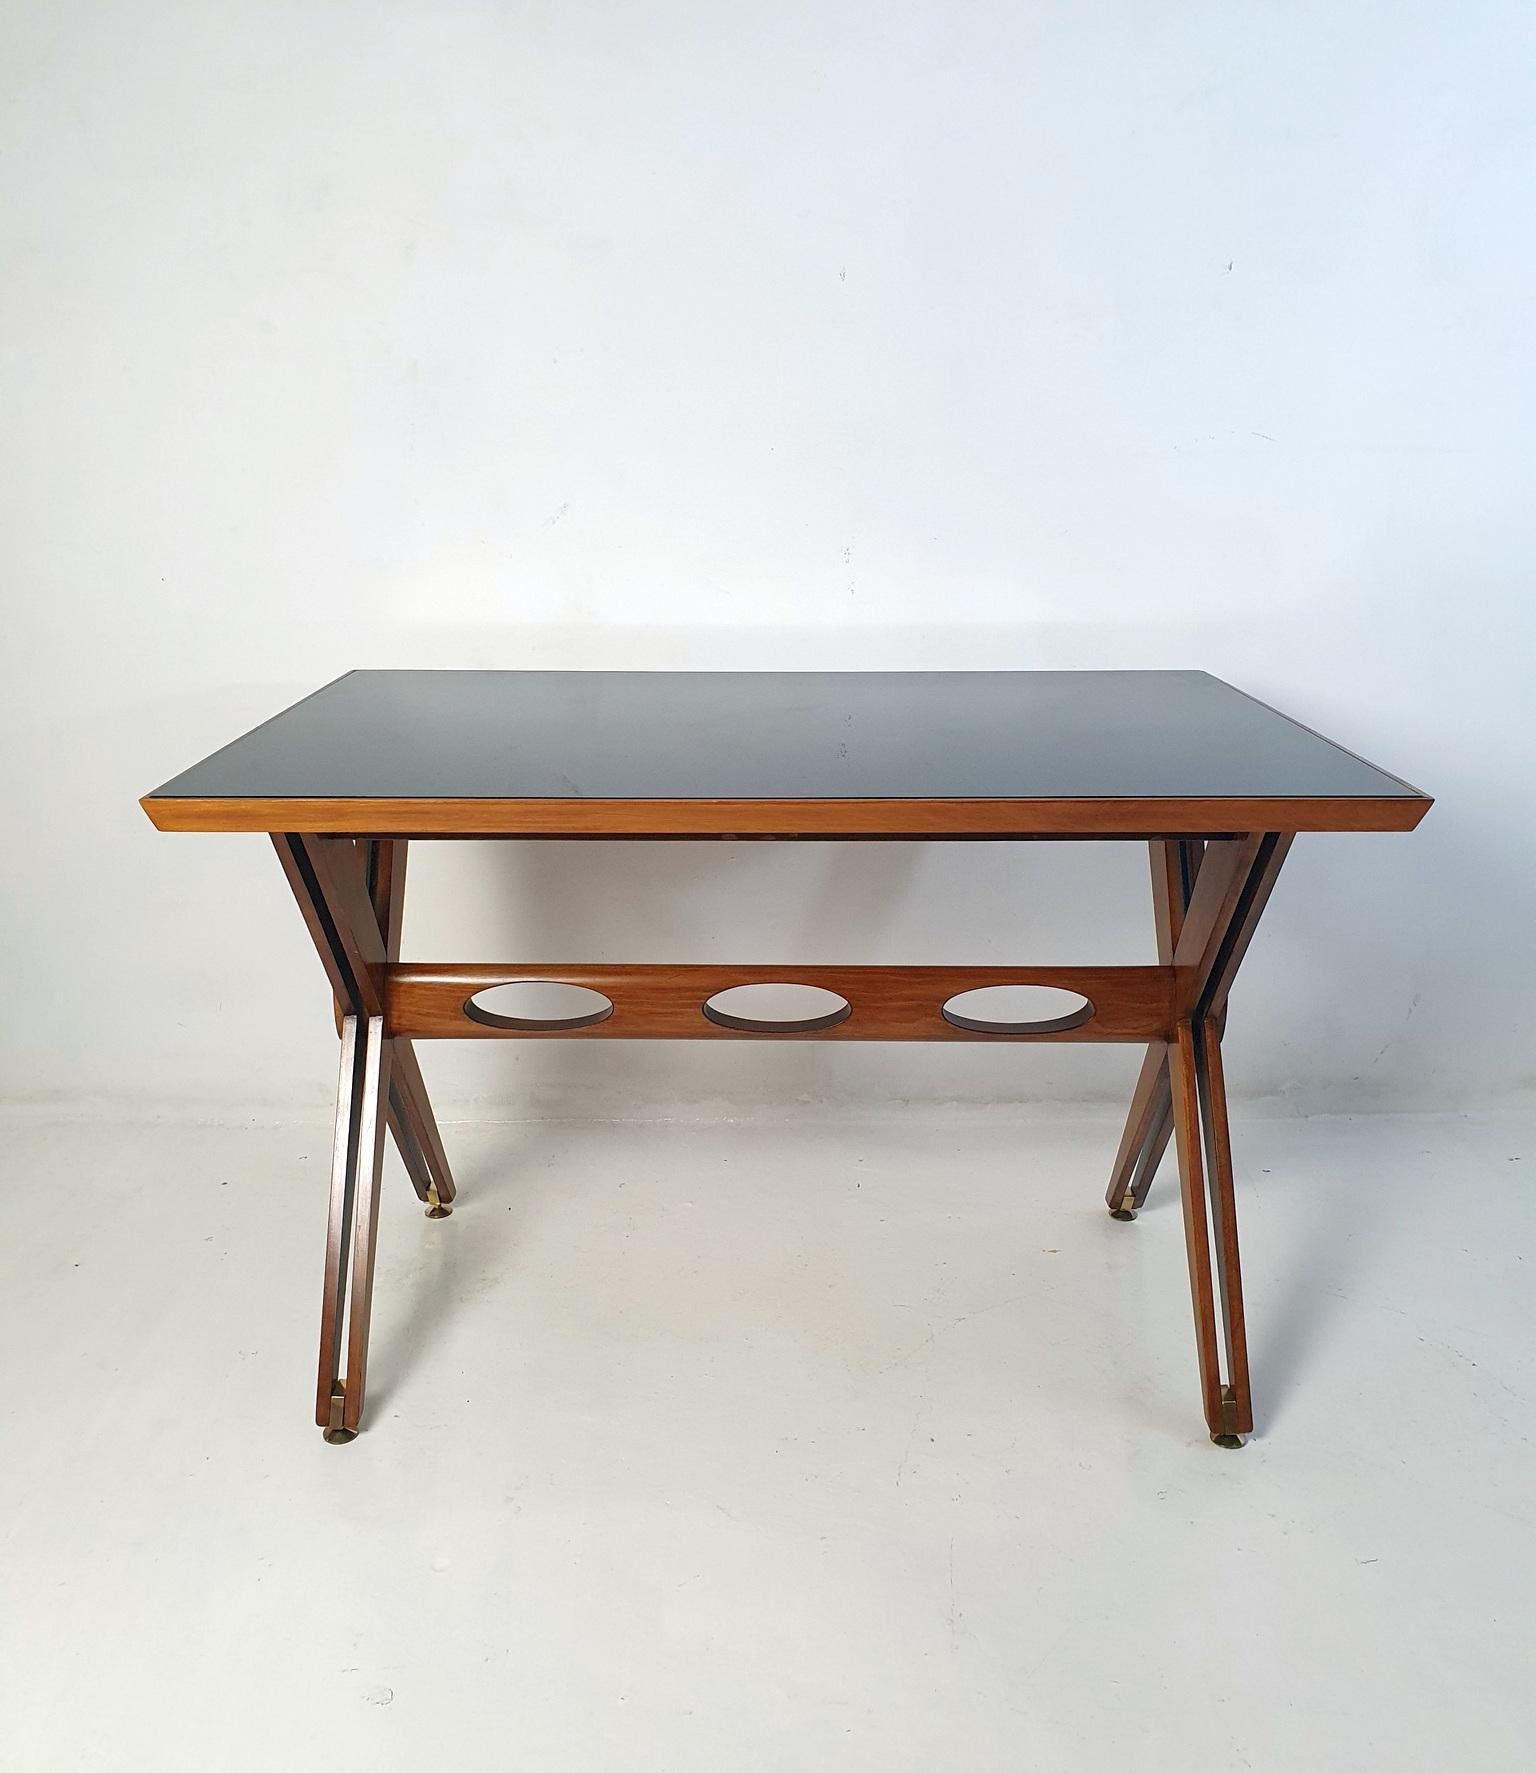 This writing desk, proudly crafted in Italy, embodies the timeless aesthetics of the Mid-Century design movement prevalent during the 1950s. Its exquisite design showcases the designer's impeccable sense of form and harmony. The base of the desk,